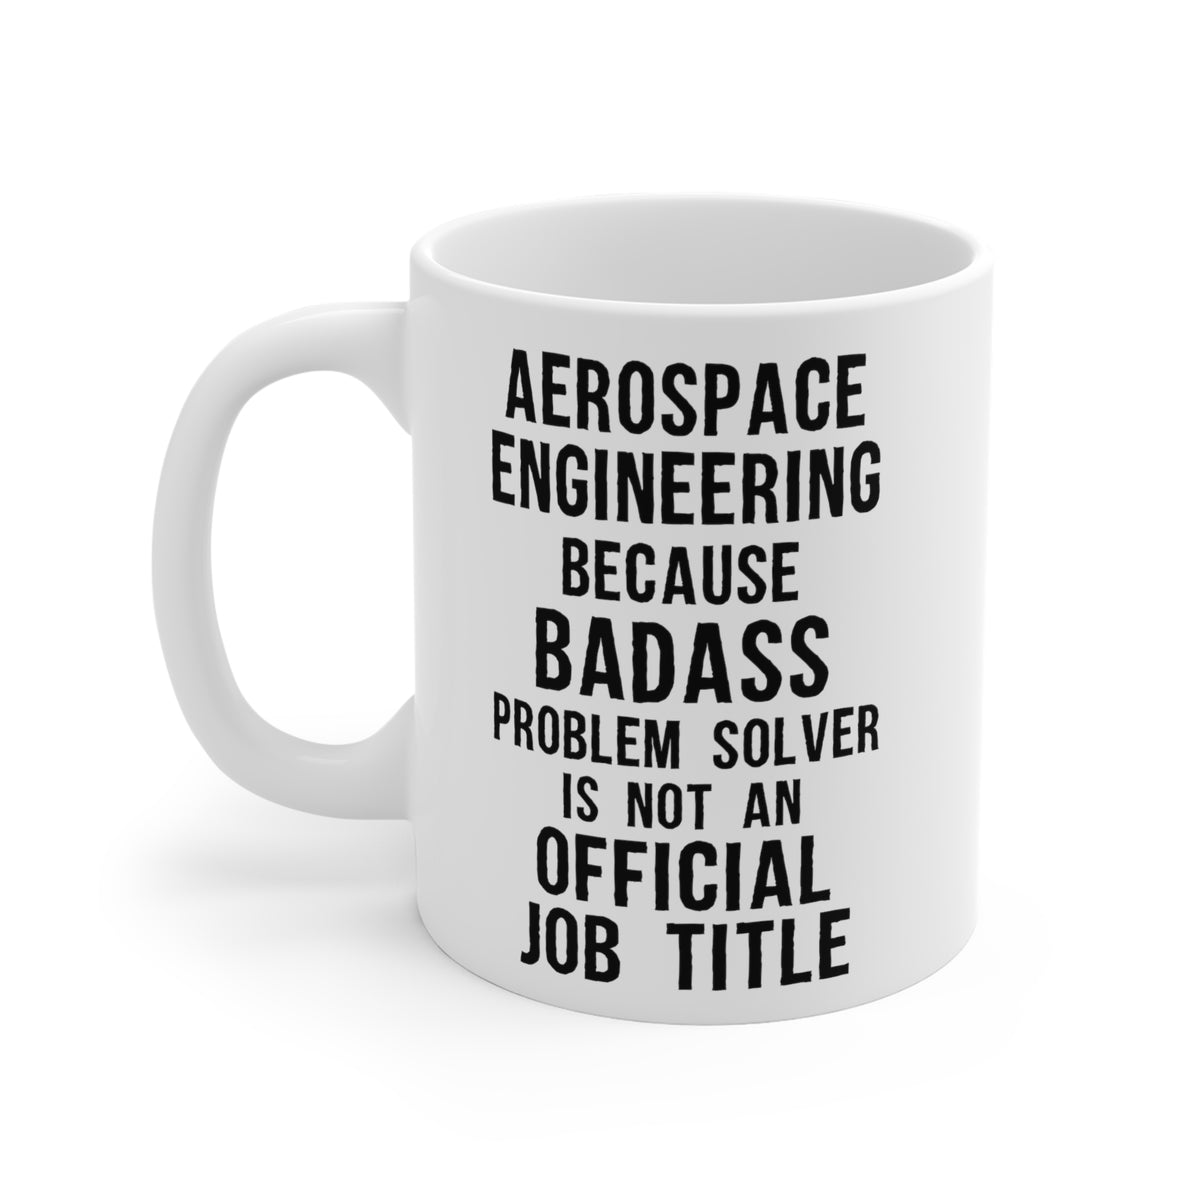 Aerospace Engineer Gifts - Aerospace Engineering Because Badass Problem Solver is Not an Official Job Title - Aerospace Engineer White Coffee Mug